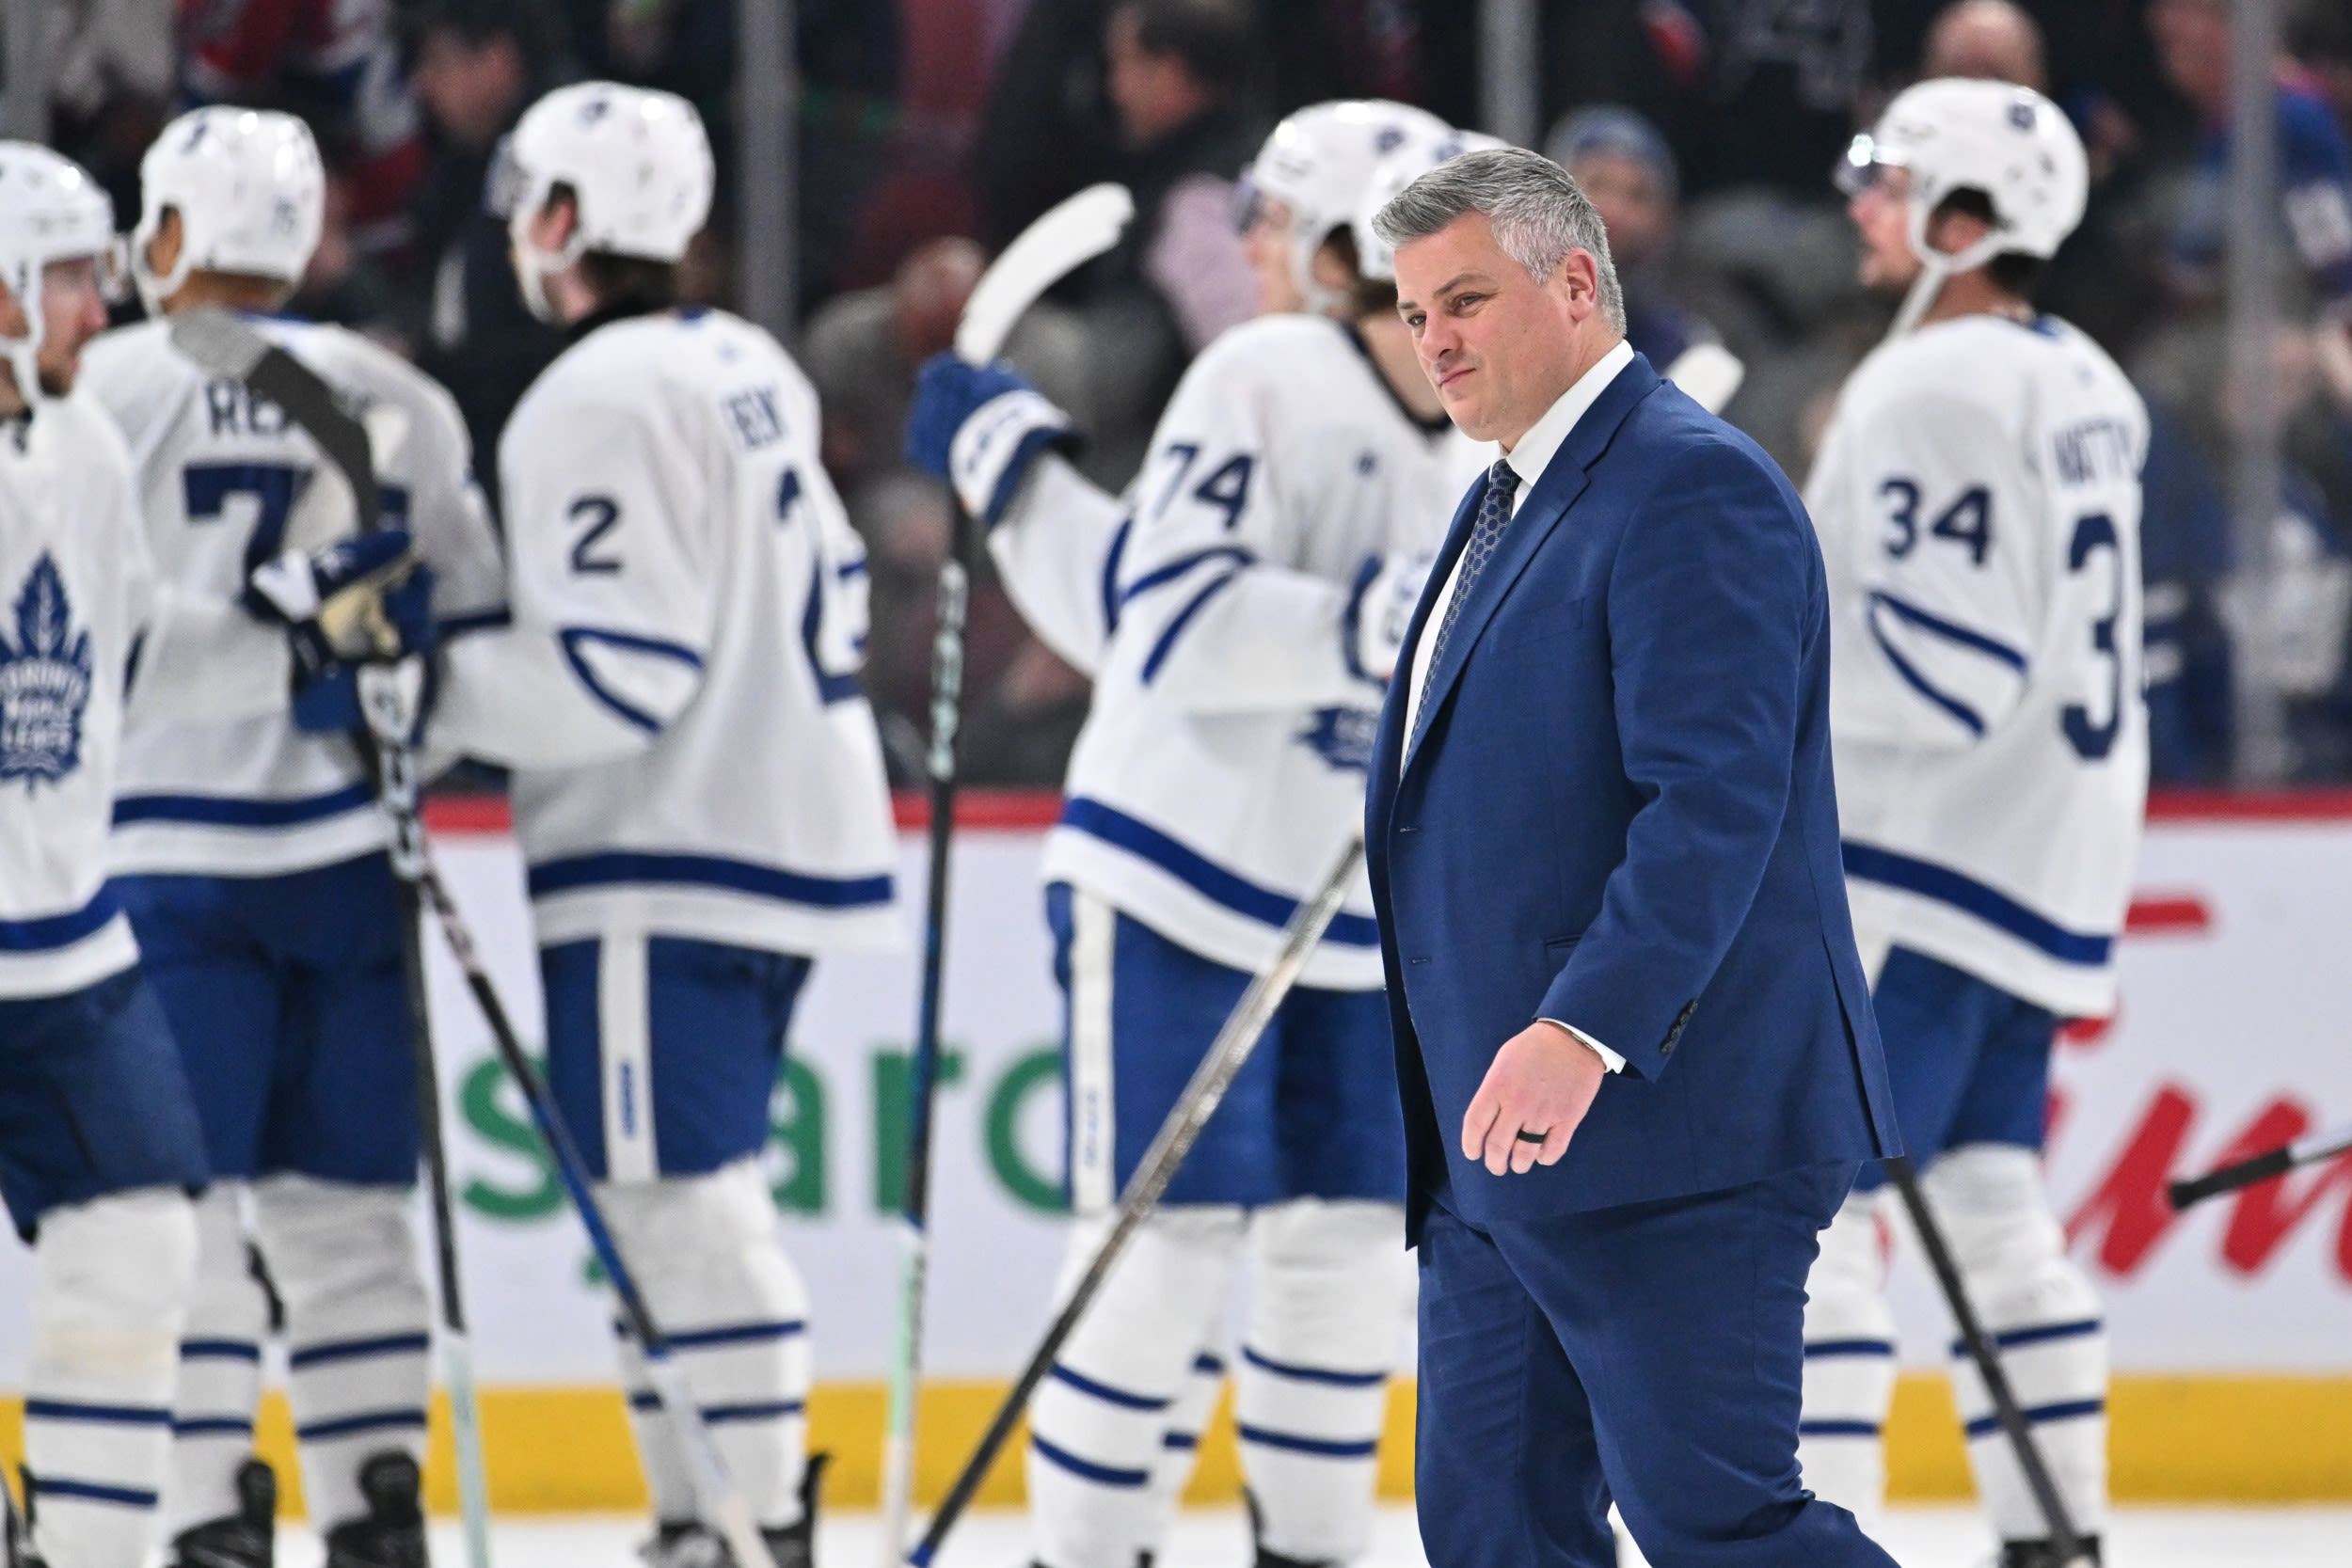 Fired Toronto Maple Leafs Head Coach Wastes Little Time Finding New NHL Job